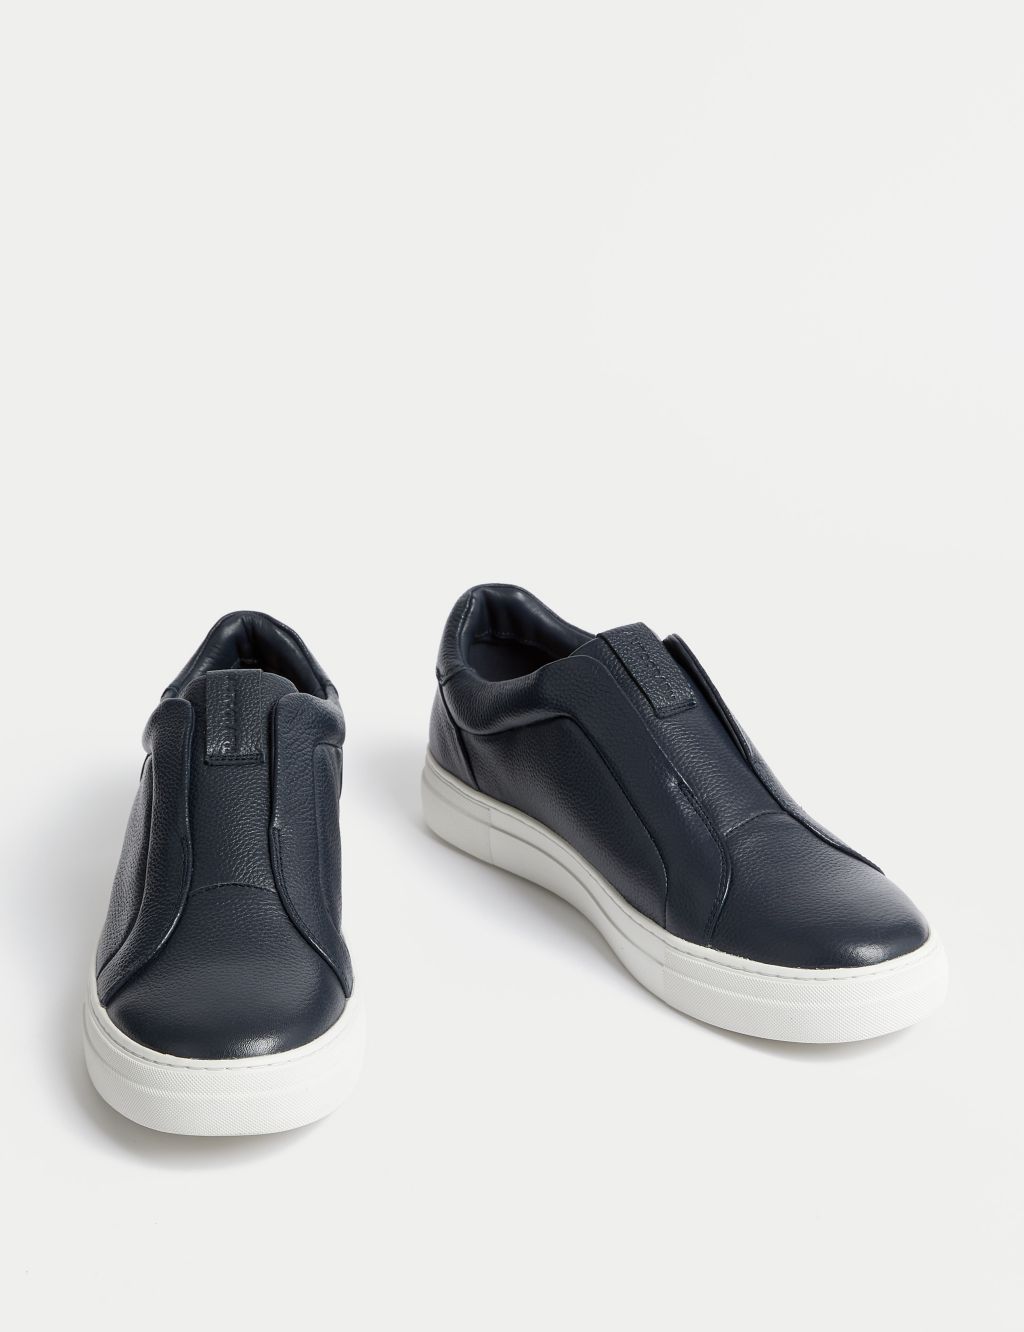 Leather Slip-On Cupsole Trainers image 1